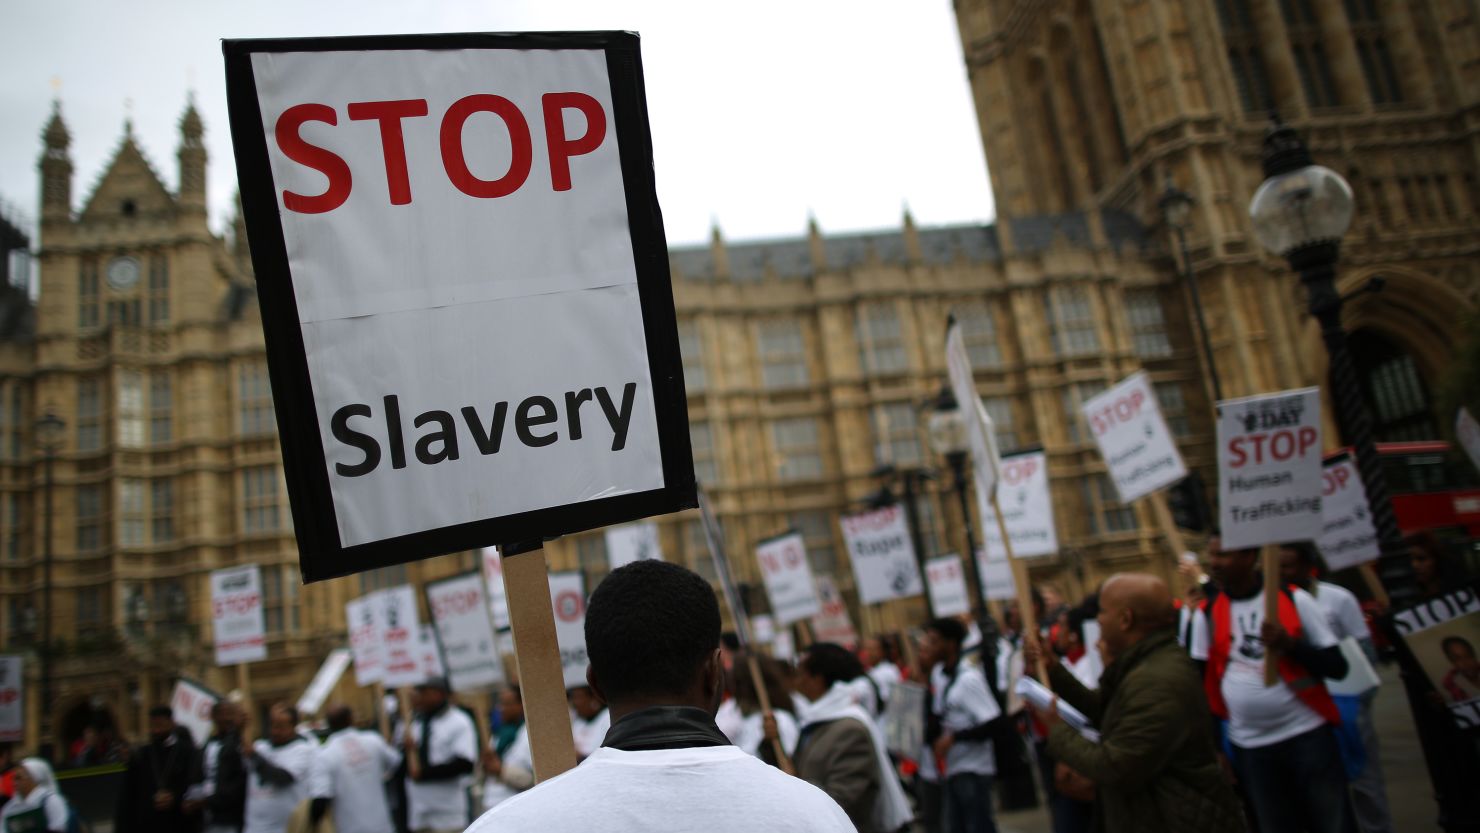 Anti-slavery activists rally outside Parliament on October 18, 2013 in London, England.